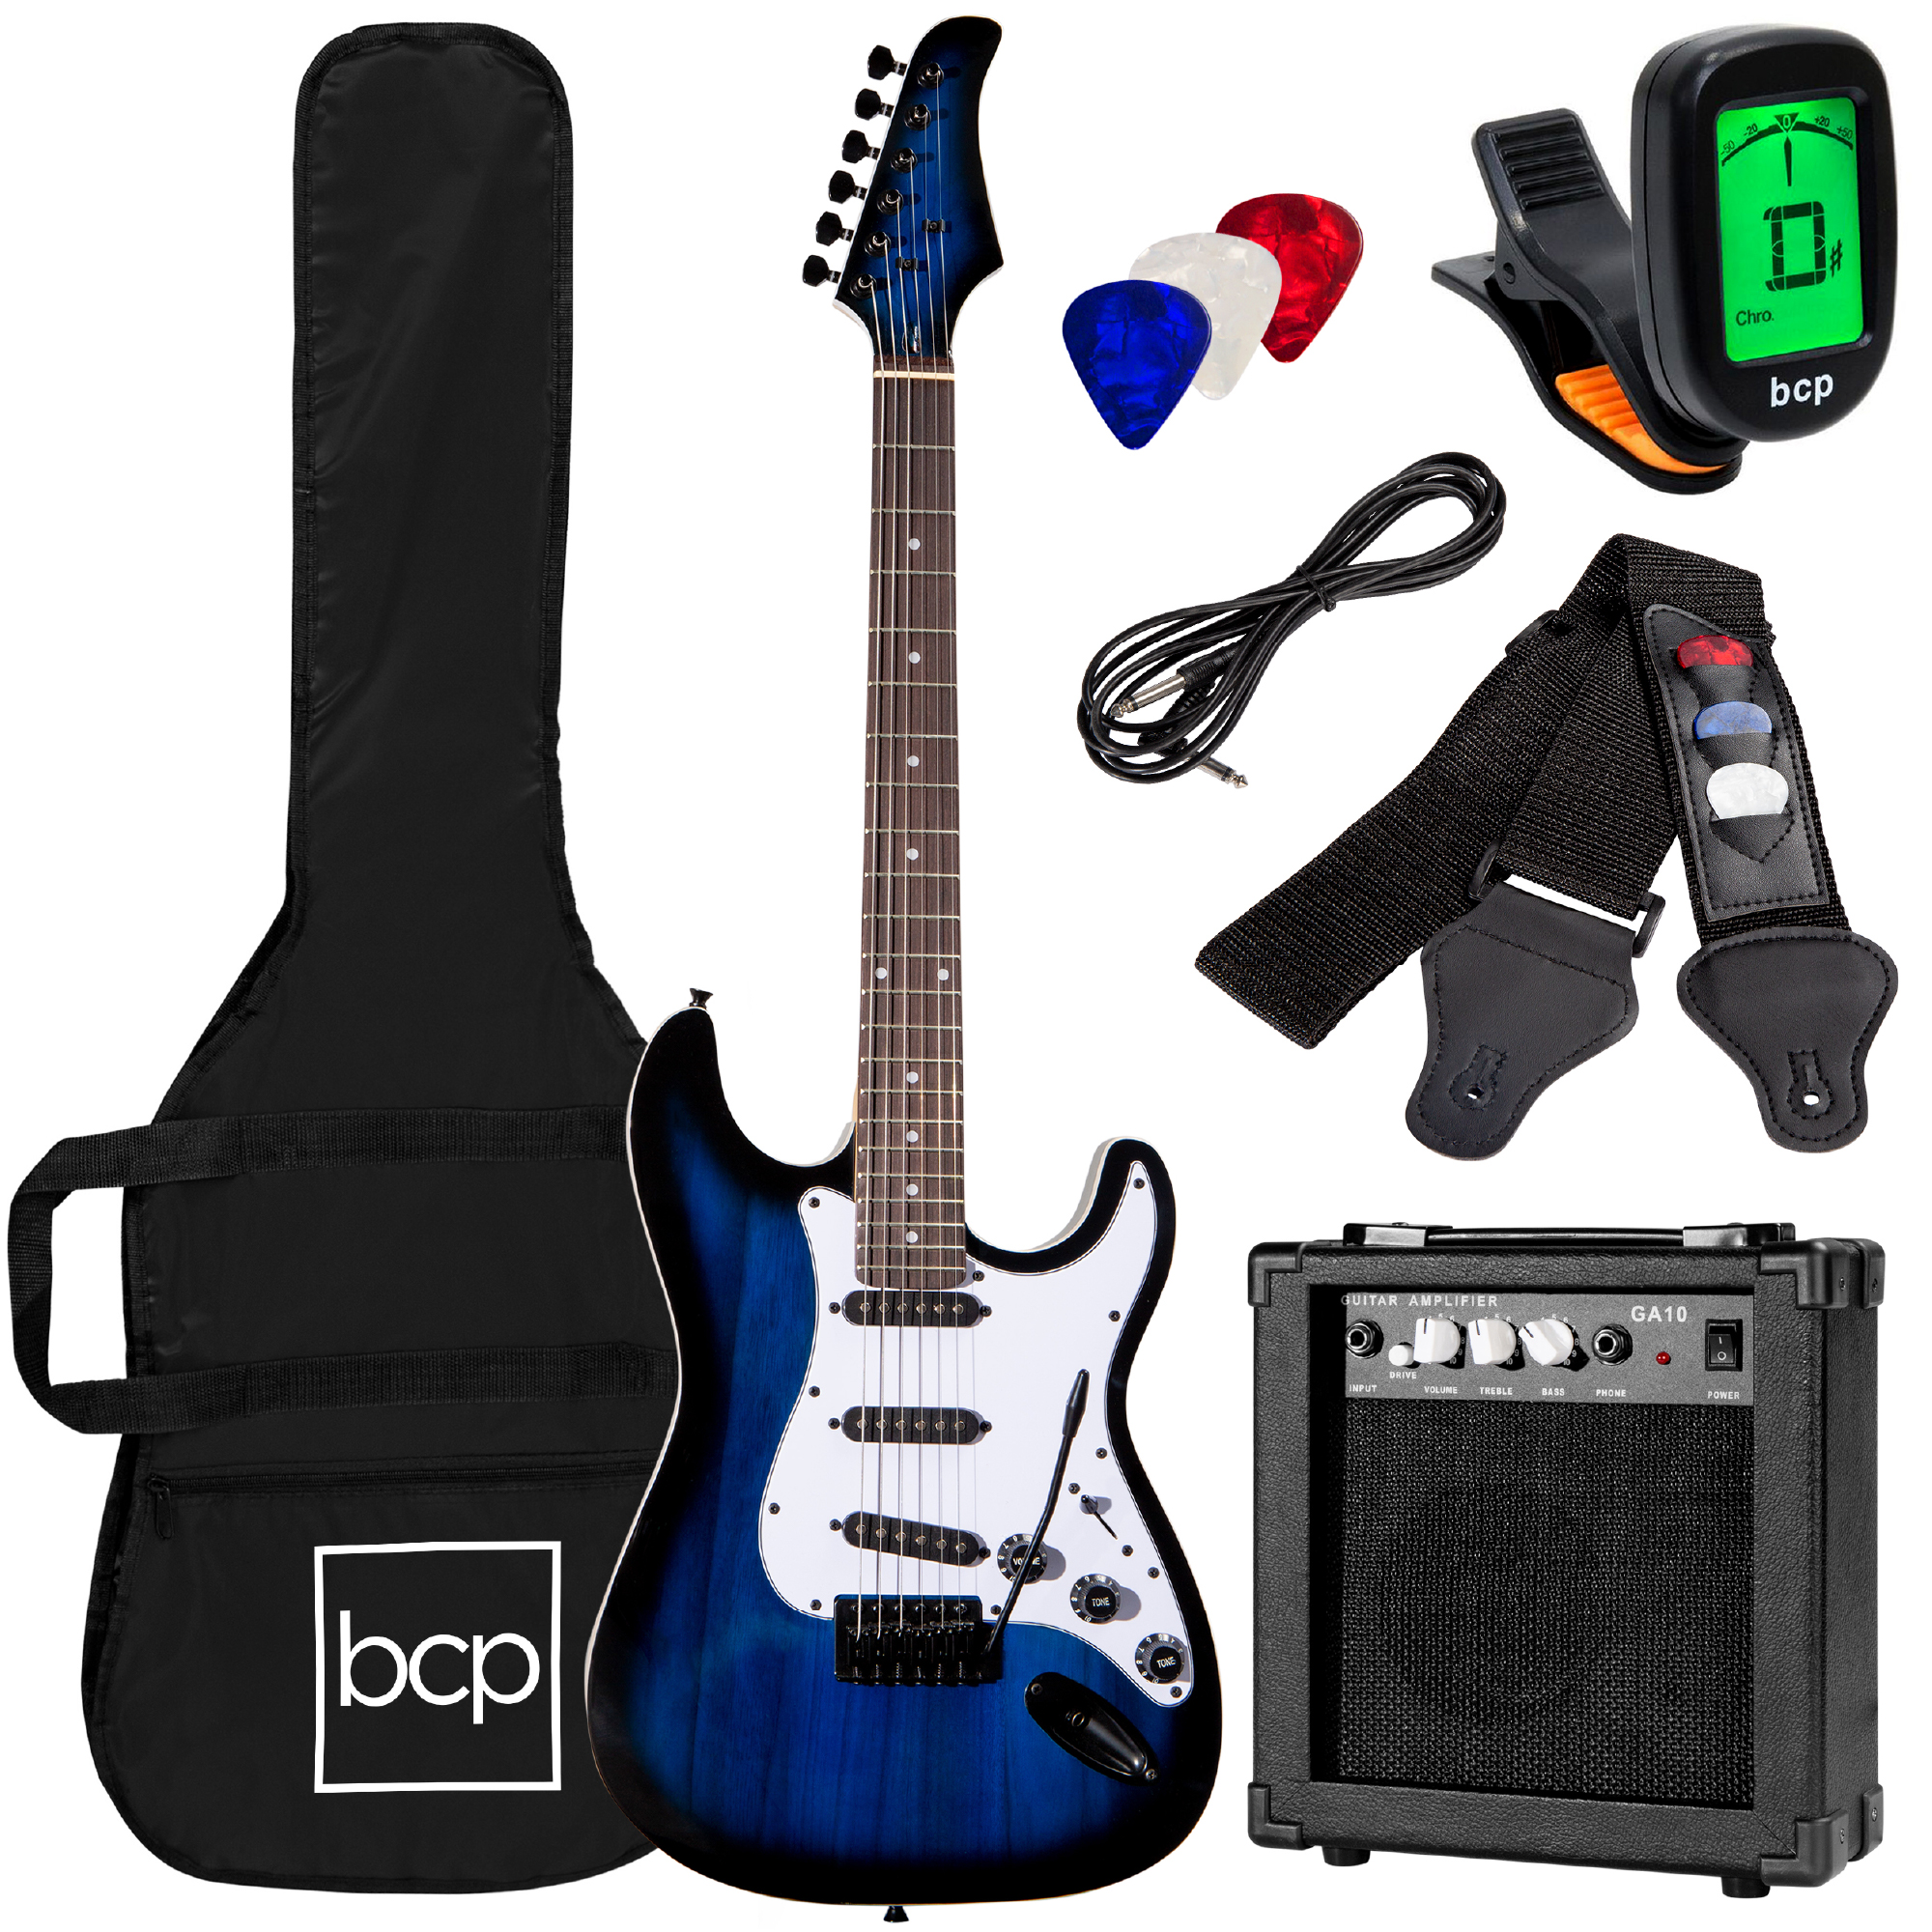 Best Choice Products 39in Full Size Beginner Electric Guitar Kit with Case, Strap, Amp, Whammy Bar - Hollywood Blue - image 1 of 6